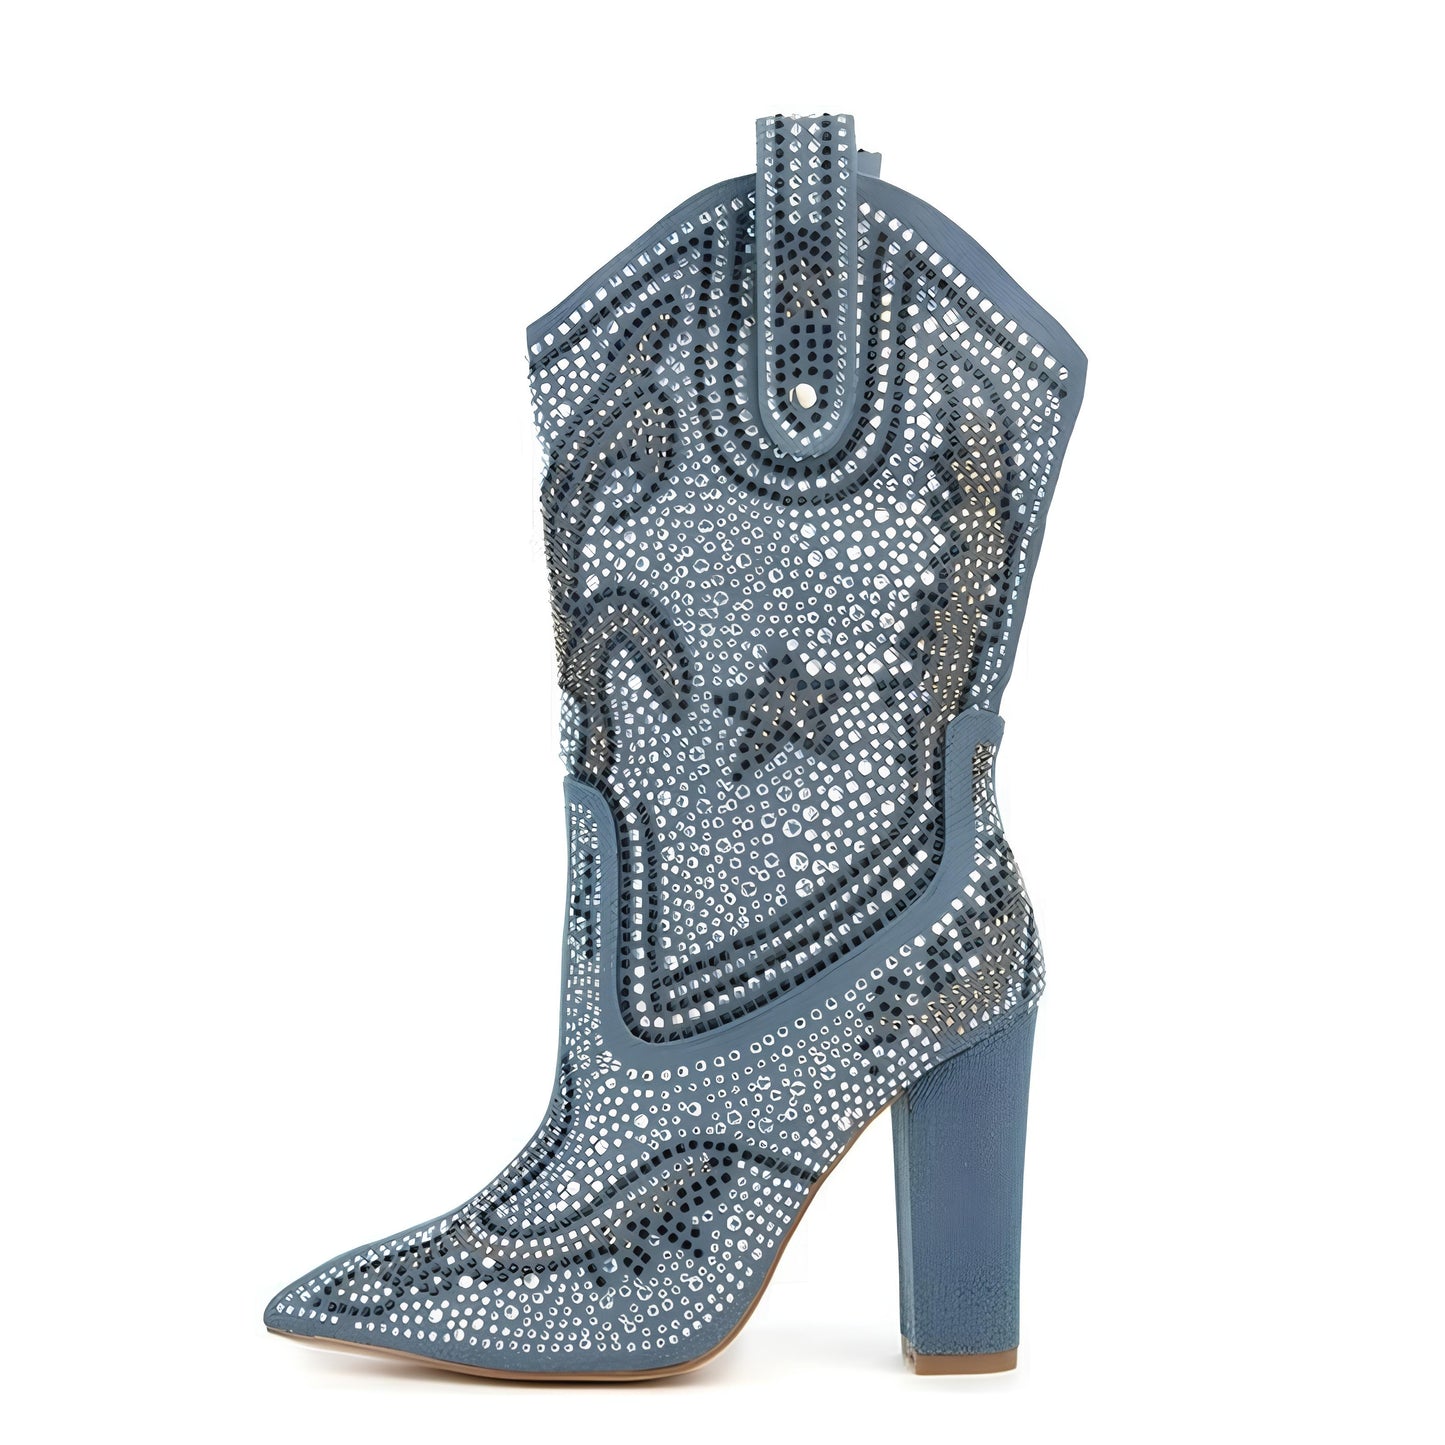 Riviera Denim Boots, stylish and durable, feature a rhinestone-embellished denim leather upper and sturdy high heels. Perfect for those who crave a chic and empowering footwear option with a wild western flair.